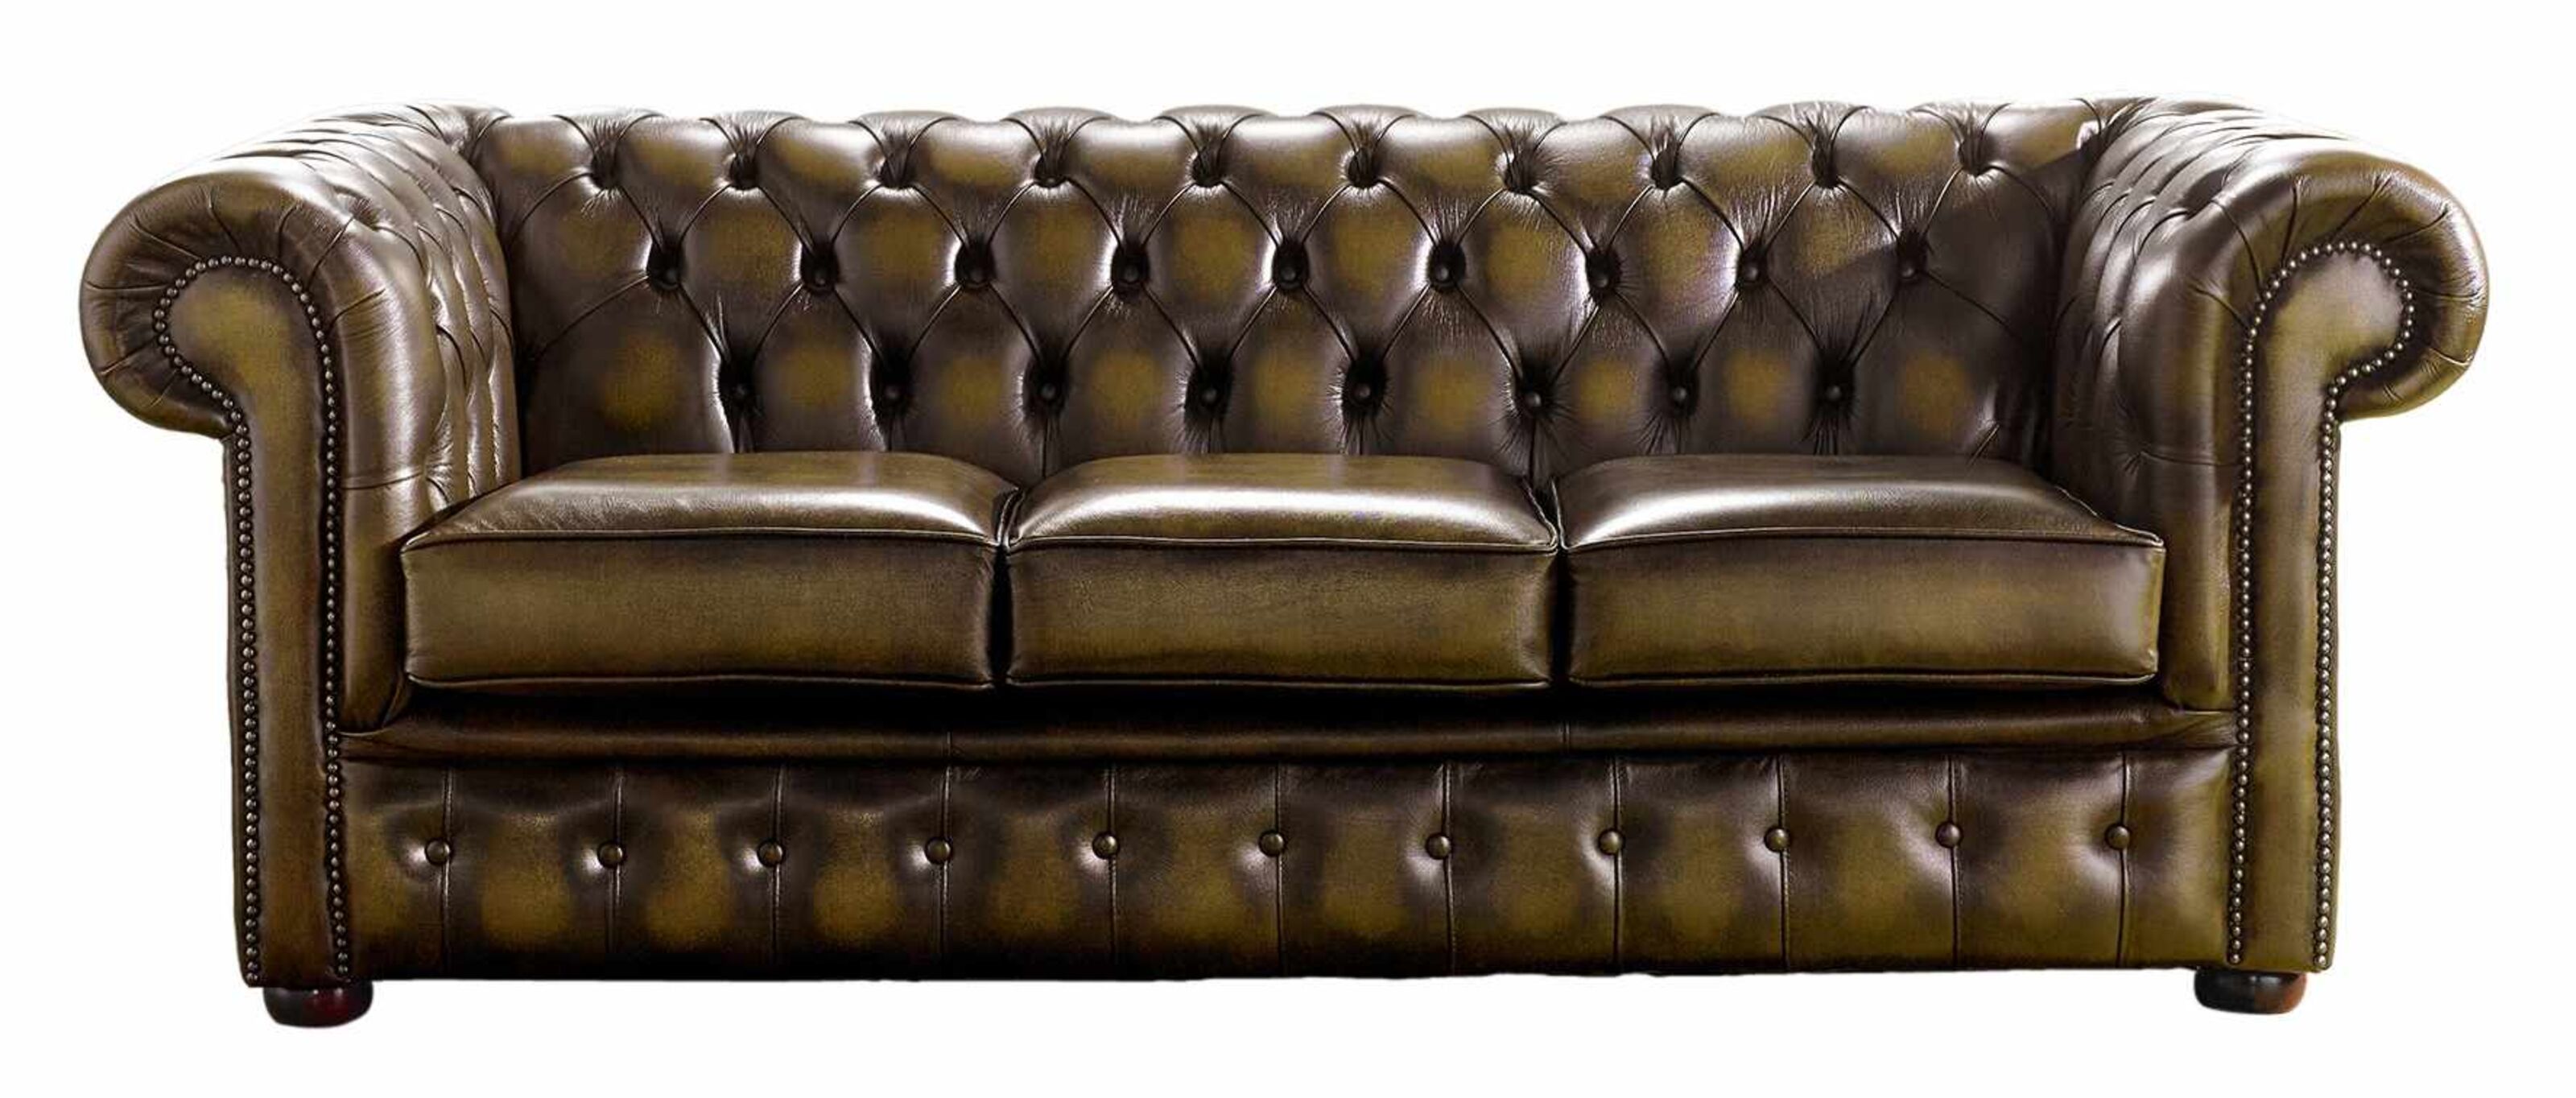 Classic Comfort Chesterfield Sofas Perfect for Home Living  %Post Title